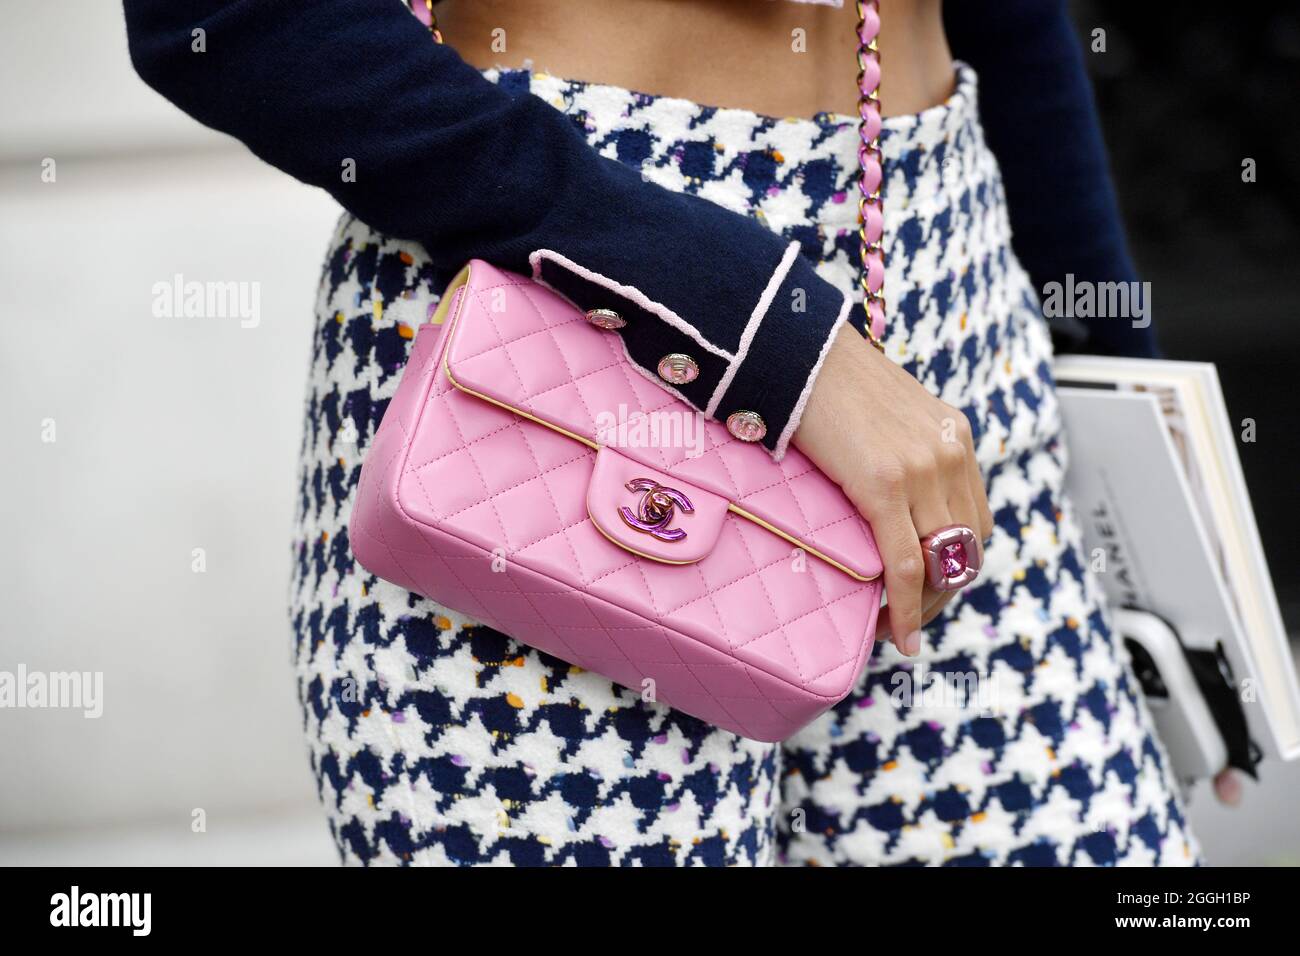 CHANEL  Bags  Iso Chanel Deauville Tote Bag Pink  Poshmark